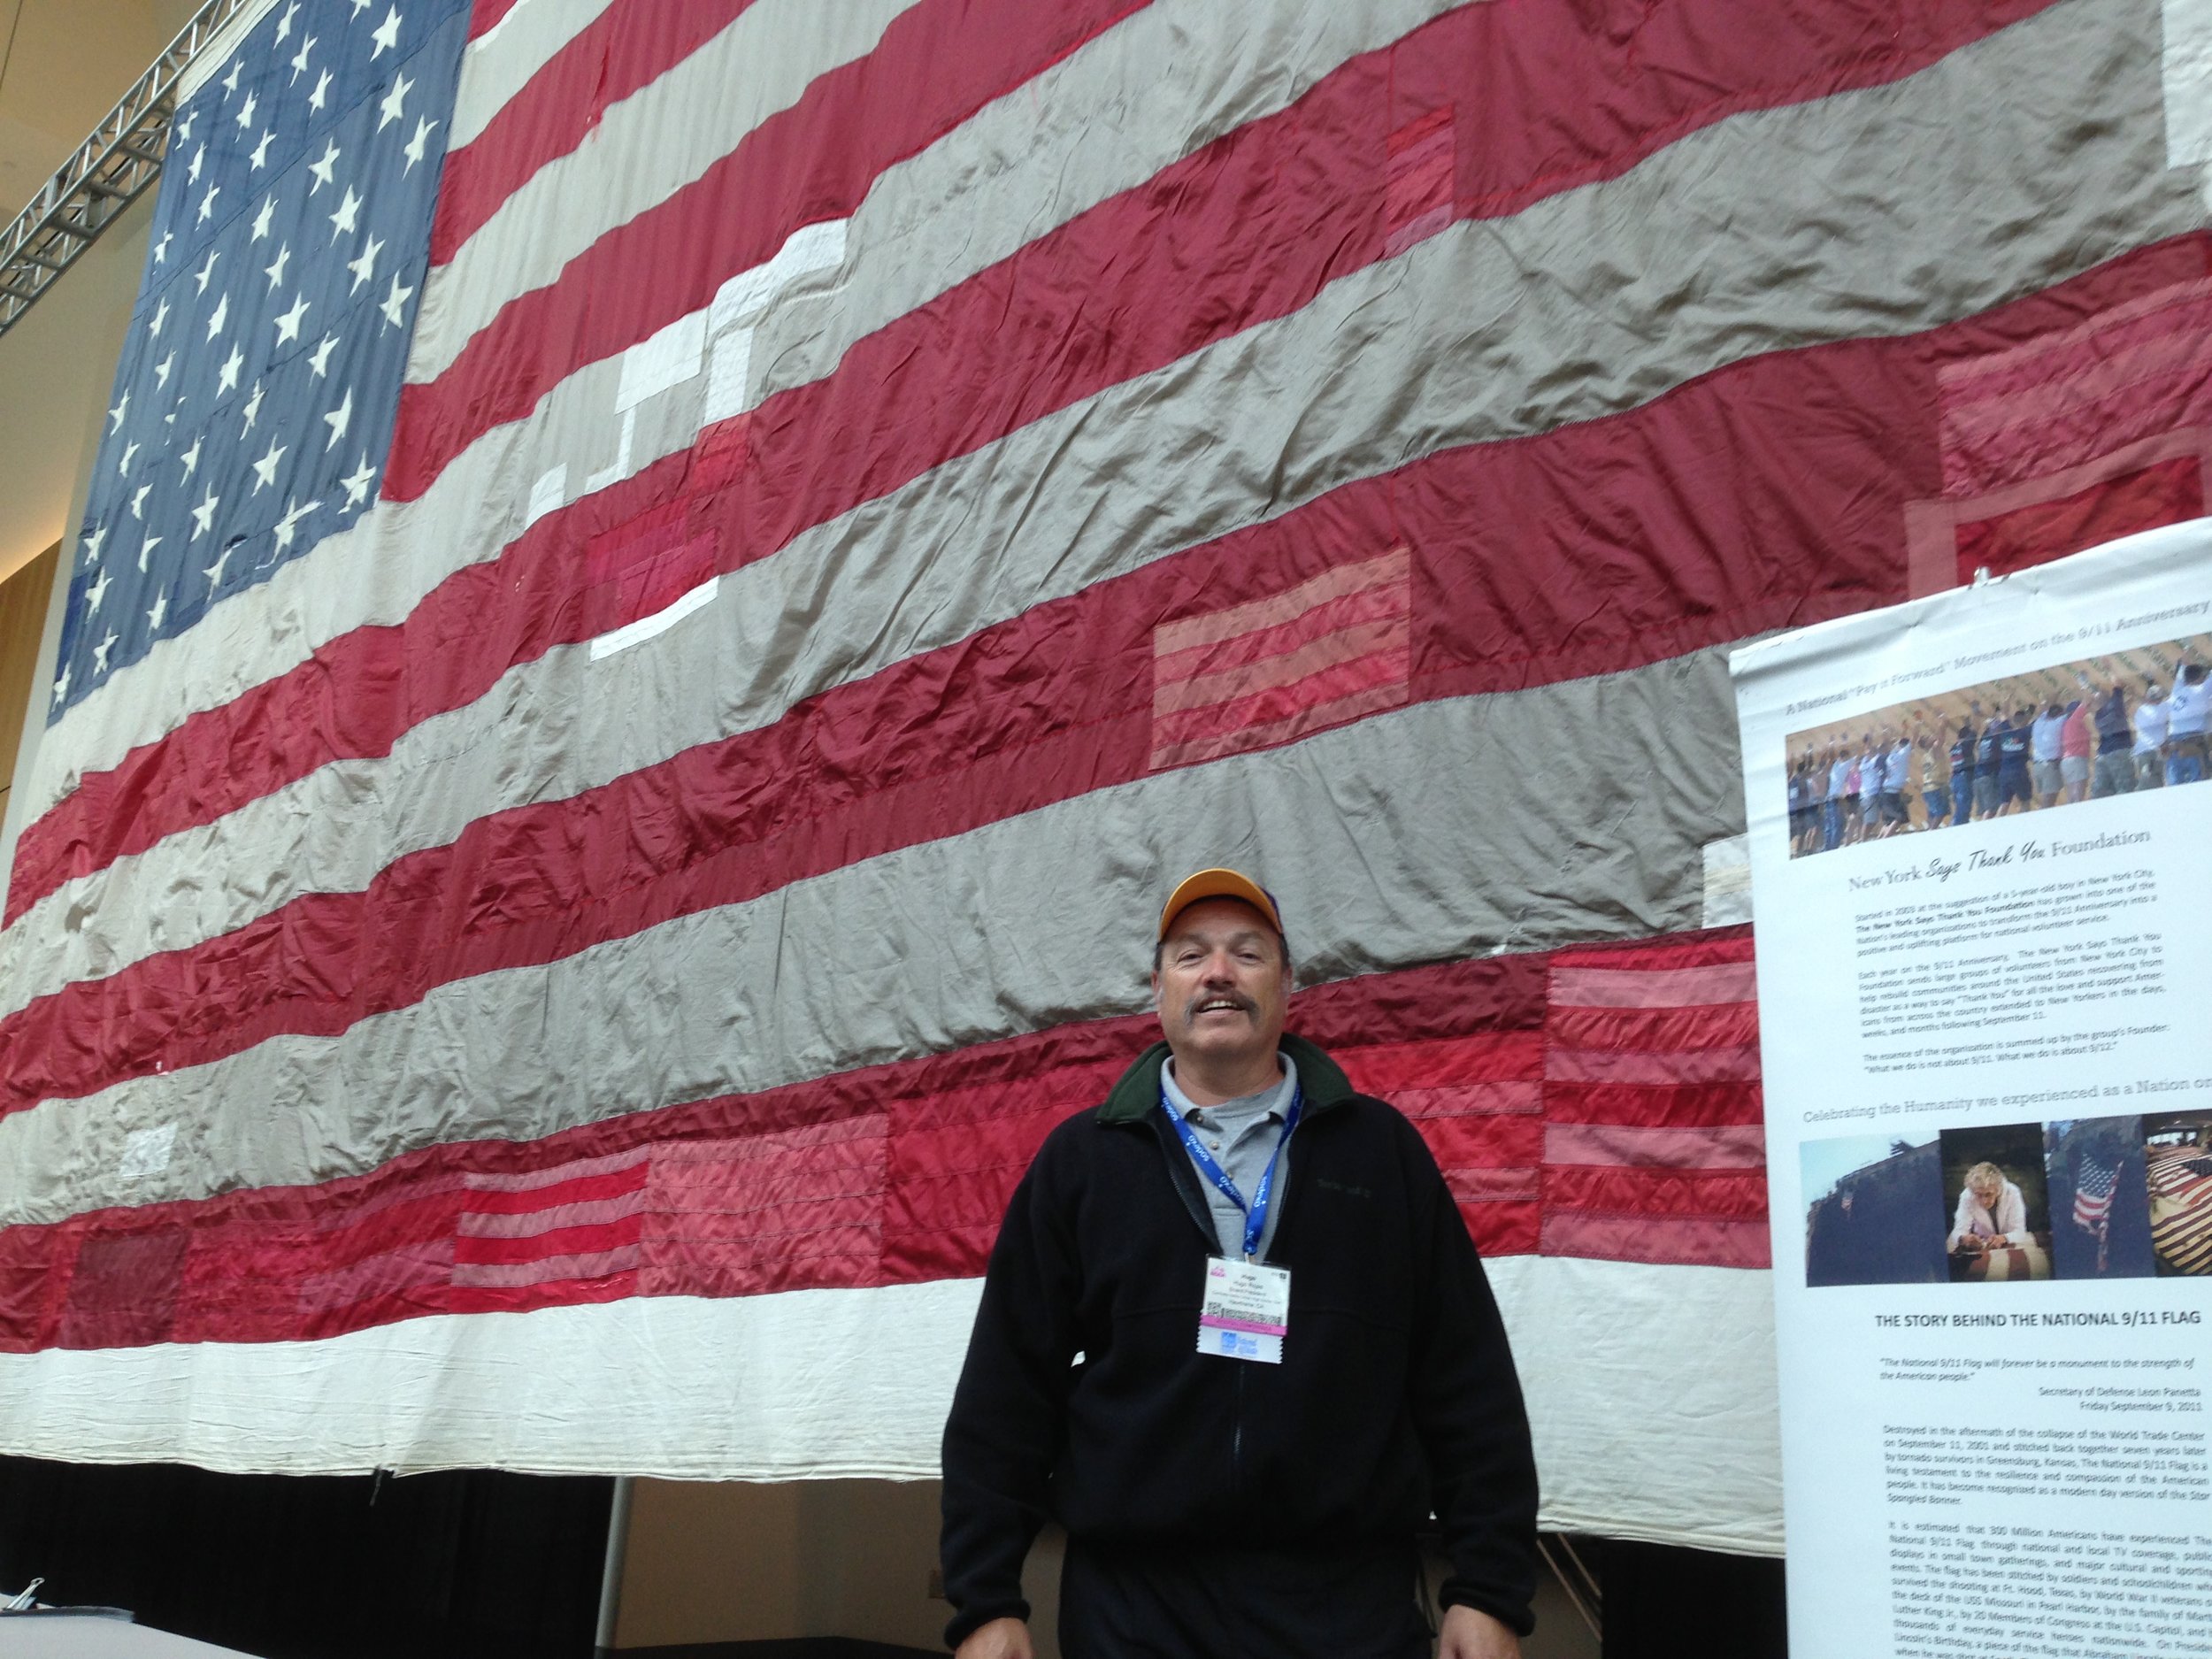 Tony with the 9/11 Memorial flag in New York City